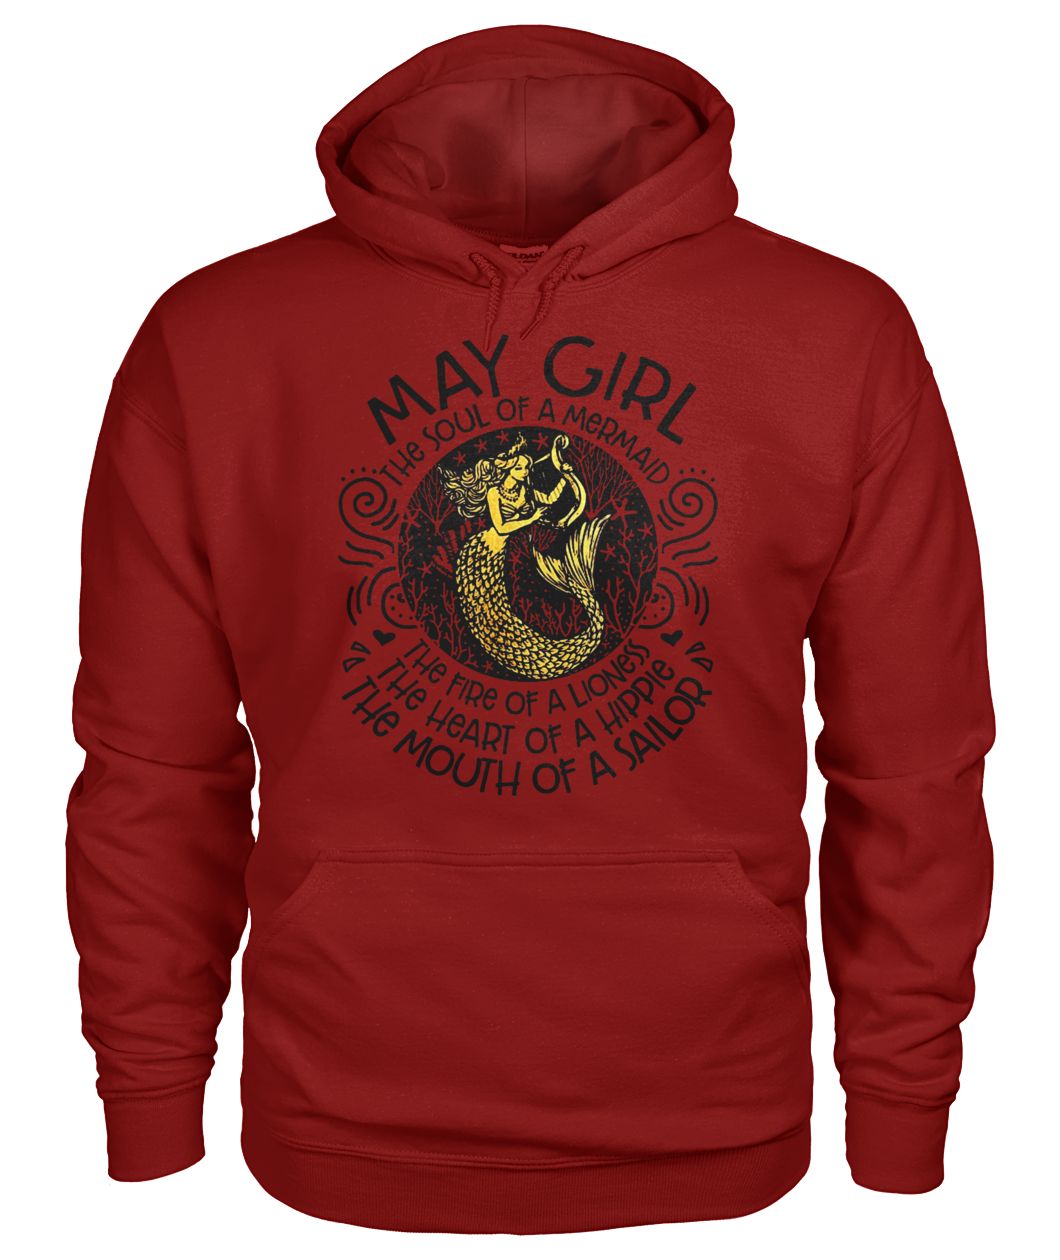 May girl the soul of a mermaid the fire of a lioness gildan hoodie